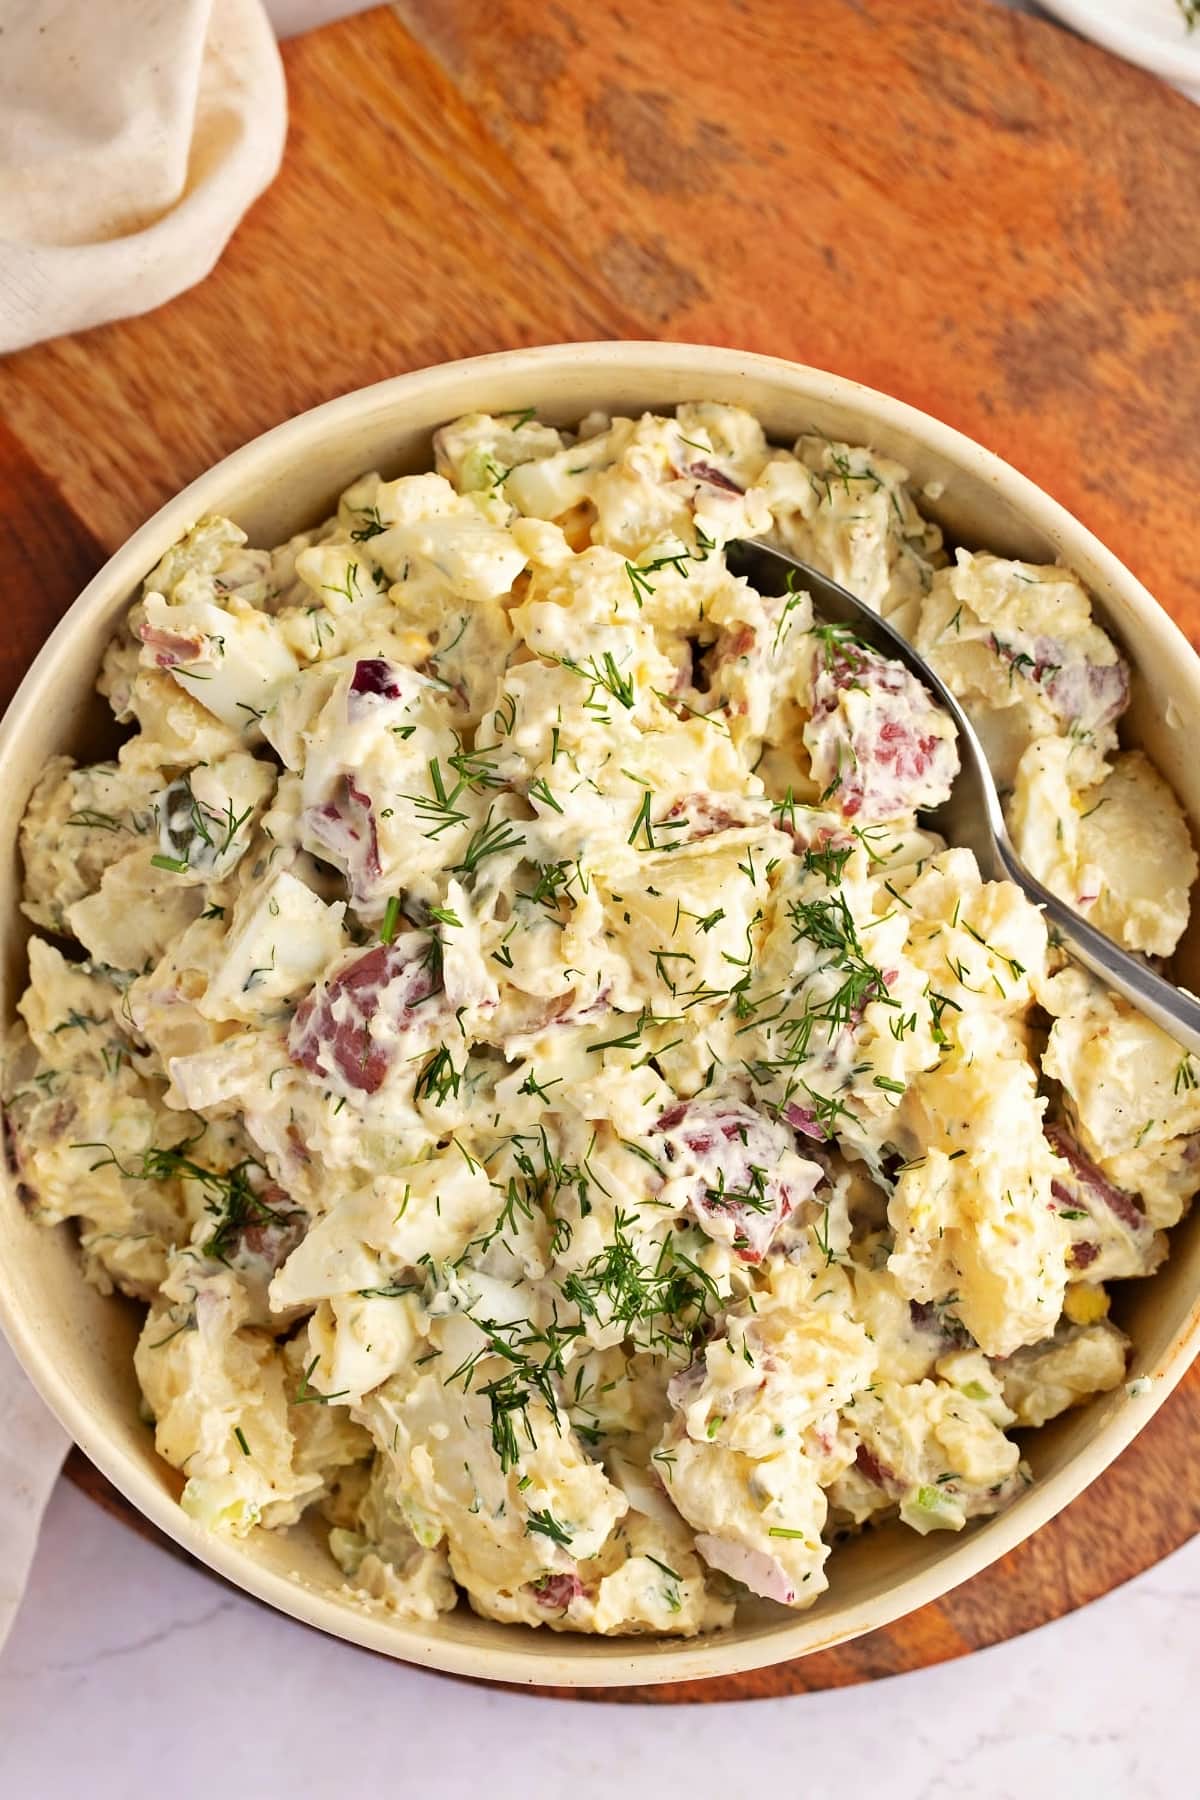 Bowl of Homemade Red Potato Salad with Dill and Red Wine Vinegar